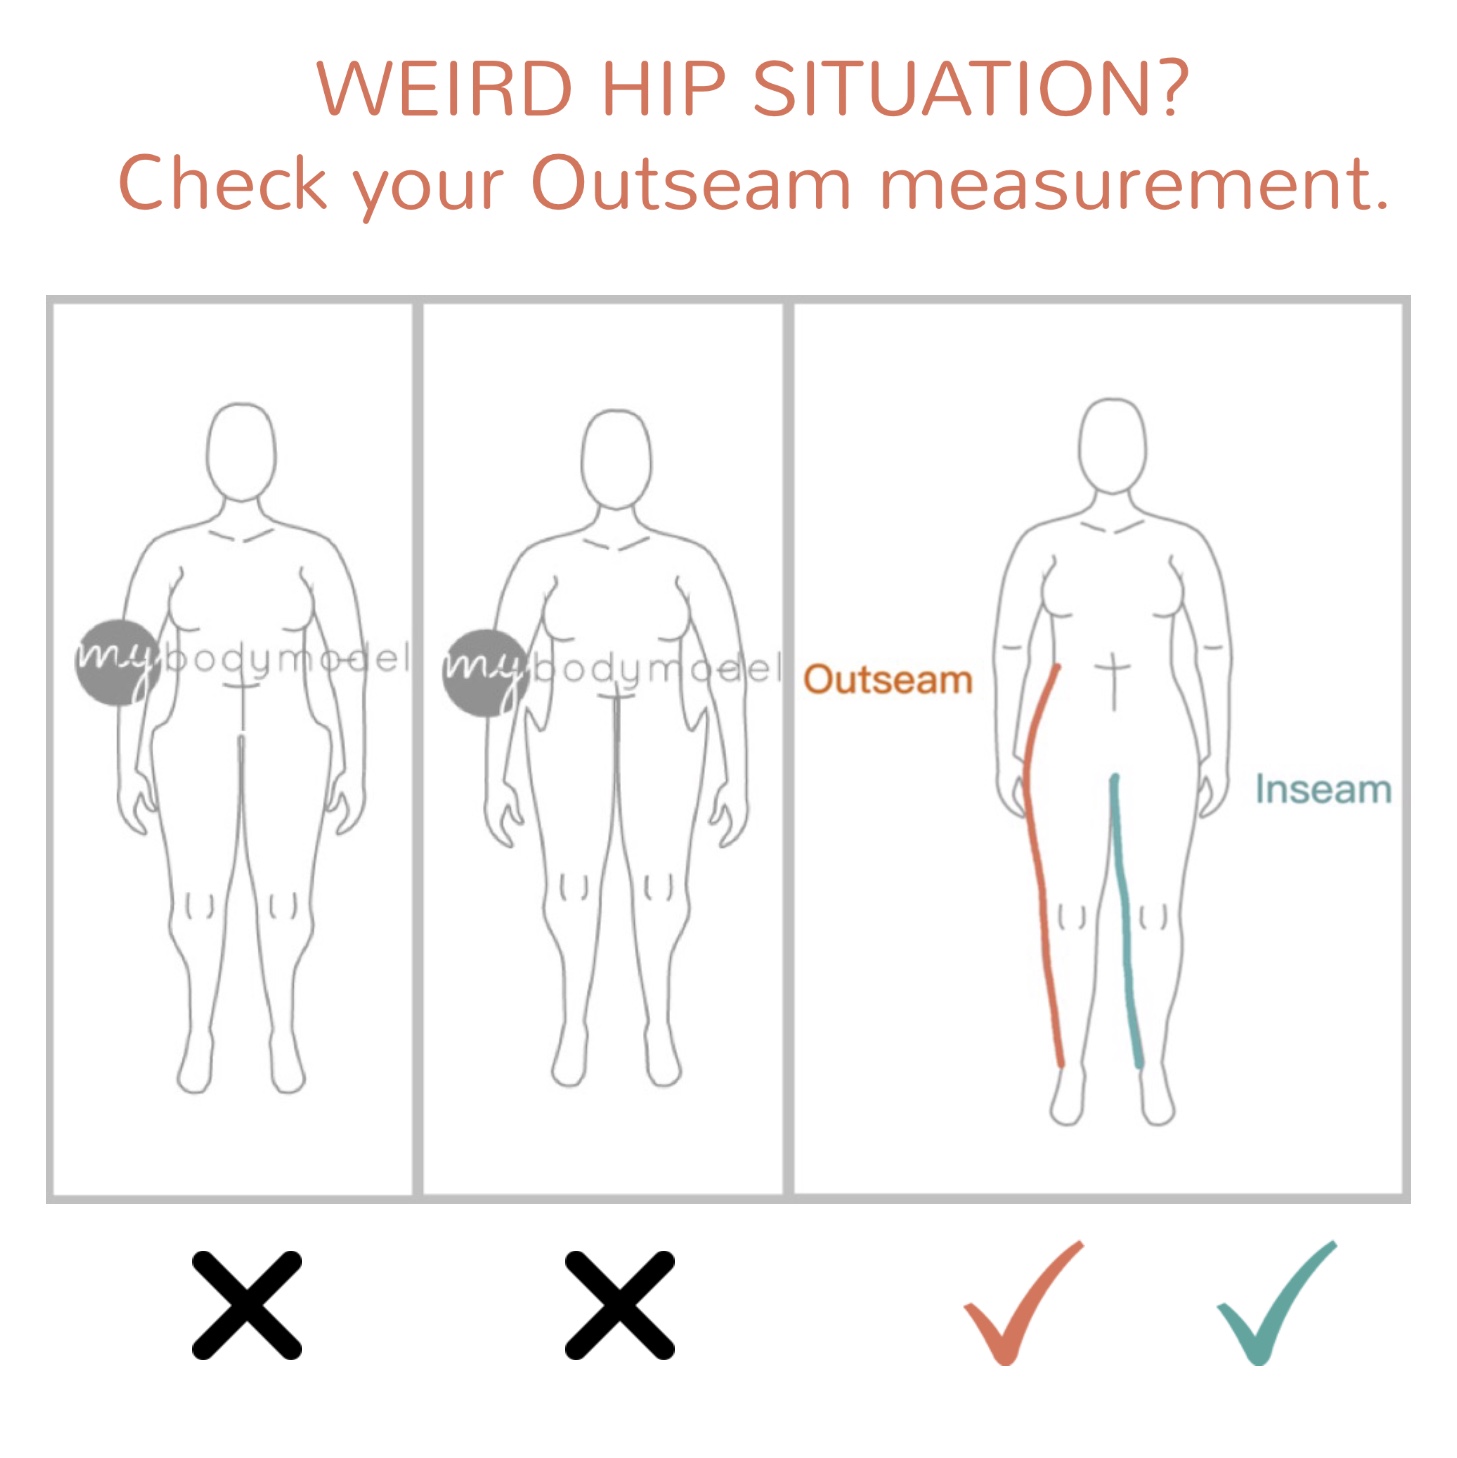 If the hip area looks weird, check your Outseam measurement.